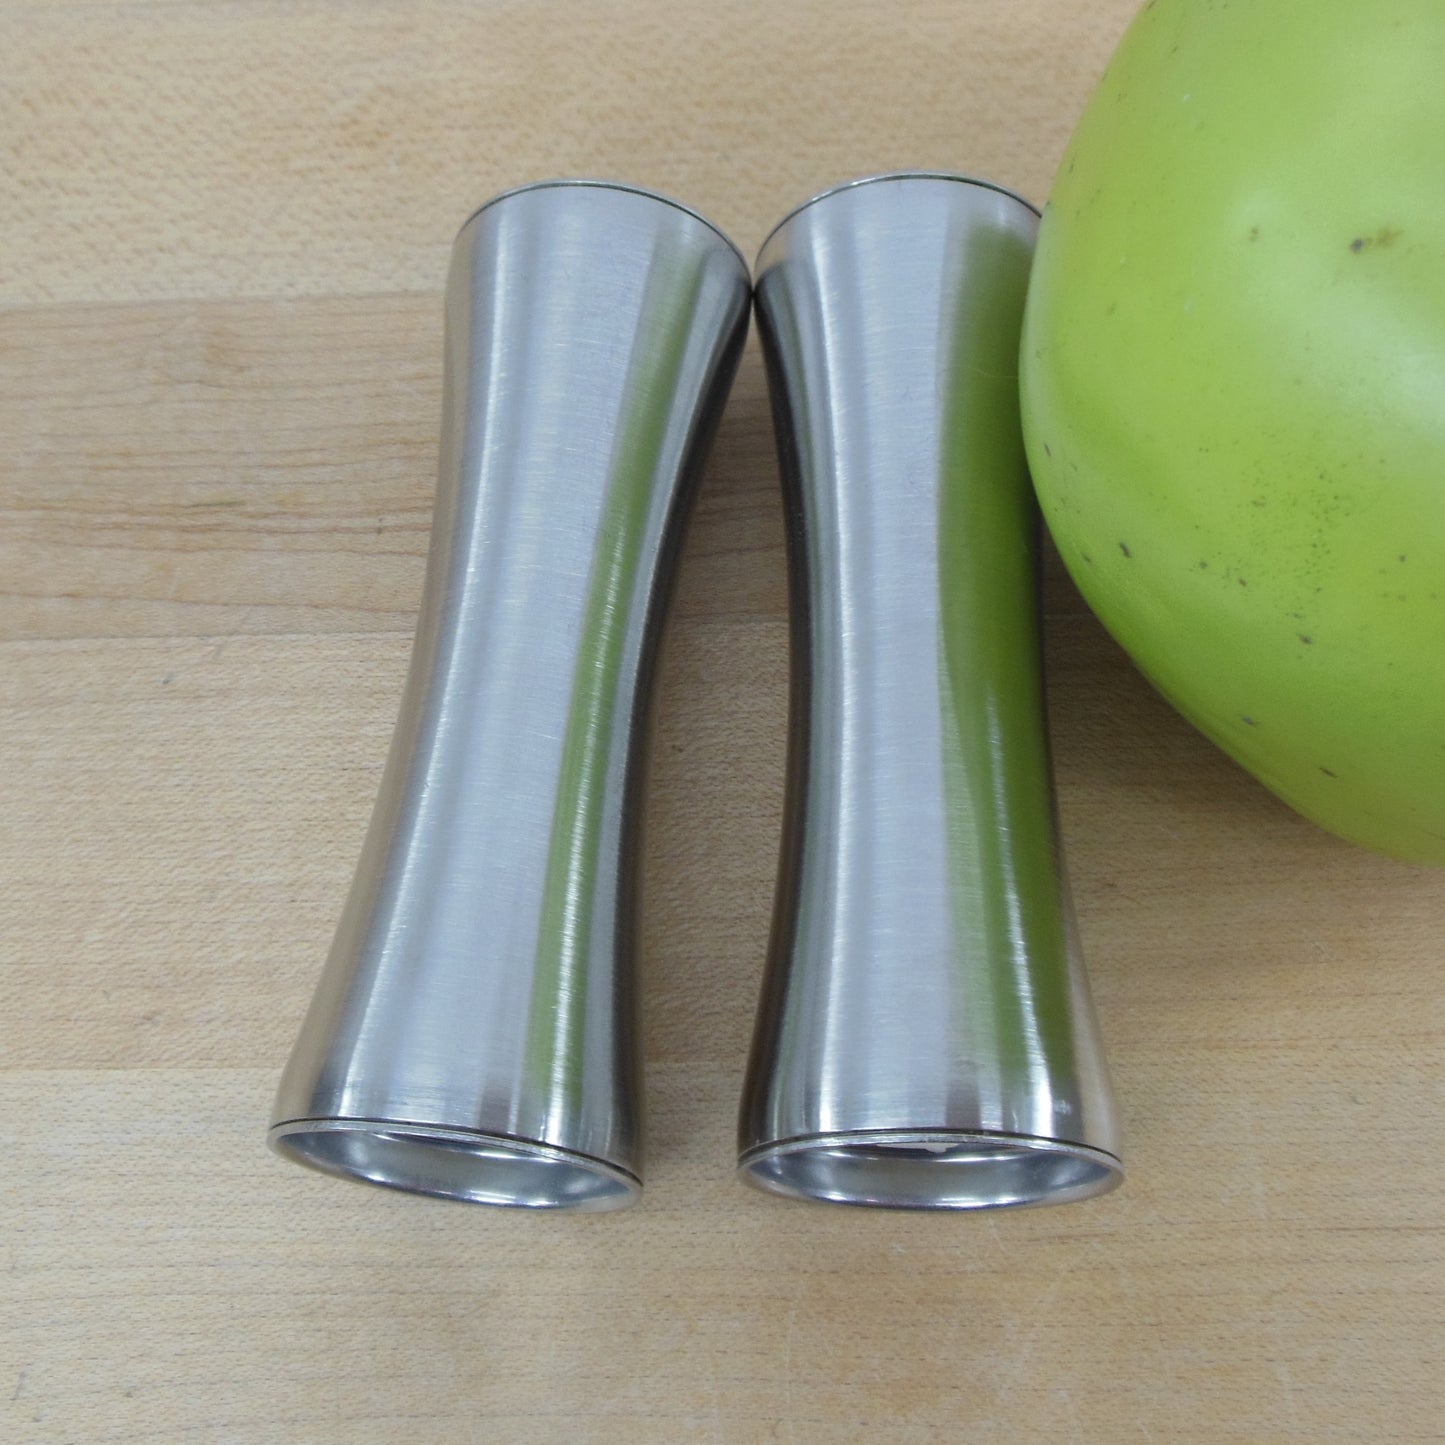 Foley USA MCM Stainless Salt & Pepper Shakers Hourglass Cylinder